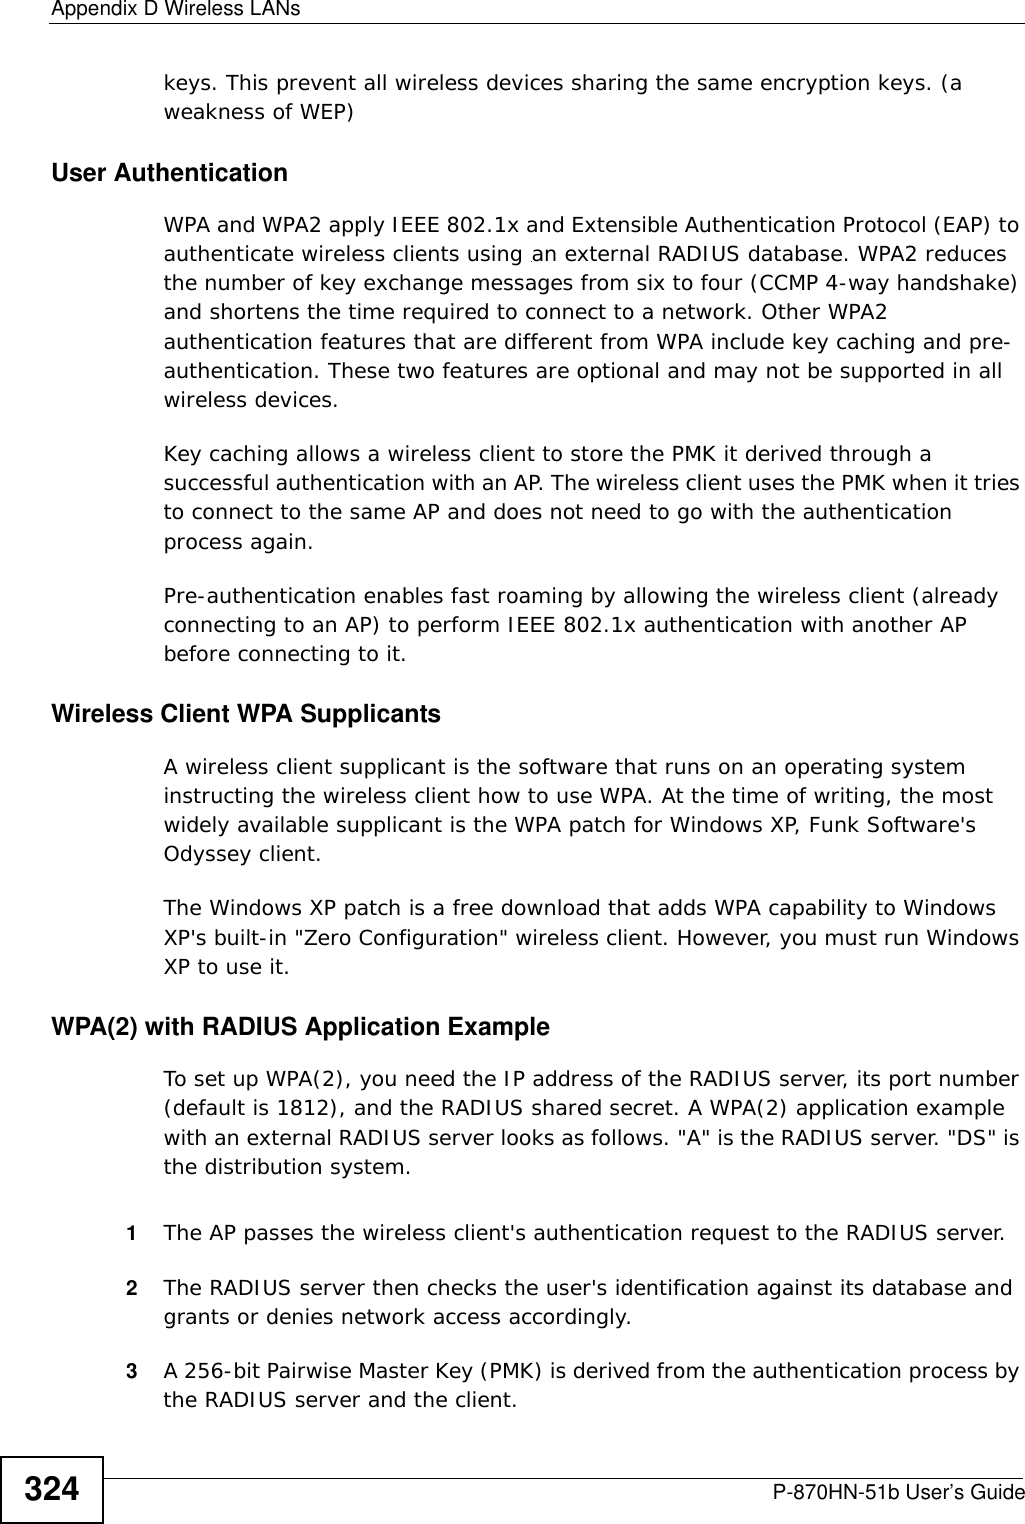 Appendix D Wireless LANsP-870HN-51b User’s Guide324keys. This prevent all wireless devices sharing the same encryption keys. (a weakness of WEP)User Authentication WPA and WPA2 apply IEEE 802.1x and Extensible Authentication Protocol (EAP) to authenticate wireless clients using an external RADIUS database. WPA2 reduces the number of key exchange messages from six to four (CCMP 4-way handshake) and shortens the time required to connect to a network. Other WPA2 authentication features that are different from WPA include key caching and pre-authentication. These two features are optional and may not be supported in all wireless devices.Key caching allows a wireless client to store the PMK it derived through a successful authentication with an AP. The wireless client uses the PMK when it tries to connect to the same AP and does not need to go with the authentication process again.Pre-authentication enables fast roaming by allowing the wireless client (already connecting to an AP) to perform IEEE 802.1x authentication with another AP before connecting to it.Wireless Client WPA SupplicantsA wireless client supplicant is the software that runs on an operating system instructing the wireless client how to use WPA. At the time of writing, the most widely available supplicant is the WPA patch for Windows XP, Funk Software&apos;s Odyssey client. The Windows XP patch is a free download that adds WPA capability to Windows XP&apos;s built-in &quot;Zero Configuration&quot; wireless client. However, you must run Windows XP to use it. WPA(2) with RADIUS Application ExampleTo set up WPA(2), you need the IP address of the RADIUS server, its port number (default is 1812), and the RADIUS shared secret. A WPA(2) application example with an external RADIUS server looks as follows. &quot;A&quot; is the RADIUS server. &quot;DS&quot; is the distribution system.1The AP passes the wireless client&apos;s authentication request to the RADIUS server.2The RADIUS server then checks the user&apos;s identification against its database and grants or denies network access accordingly.3A 256-bit Pairwise Master Key (PMK) is derived from the authentication process by the RADIUS server and the client.